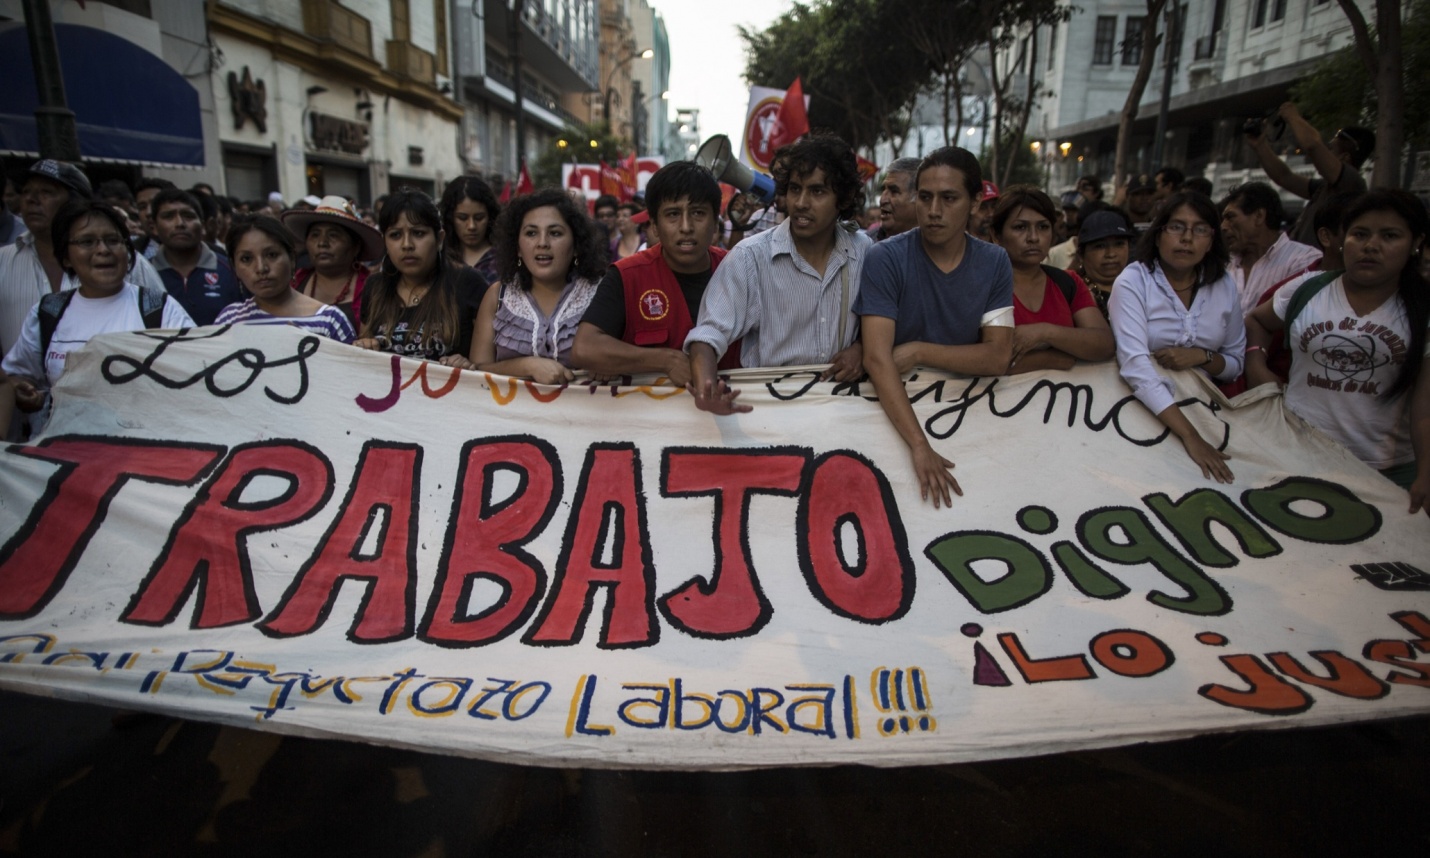 Peru labour law sparks backlash from enraged youth